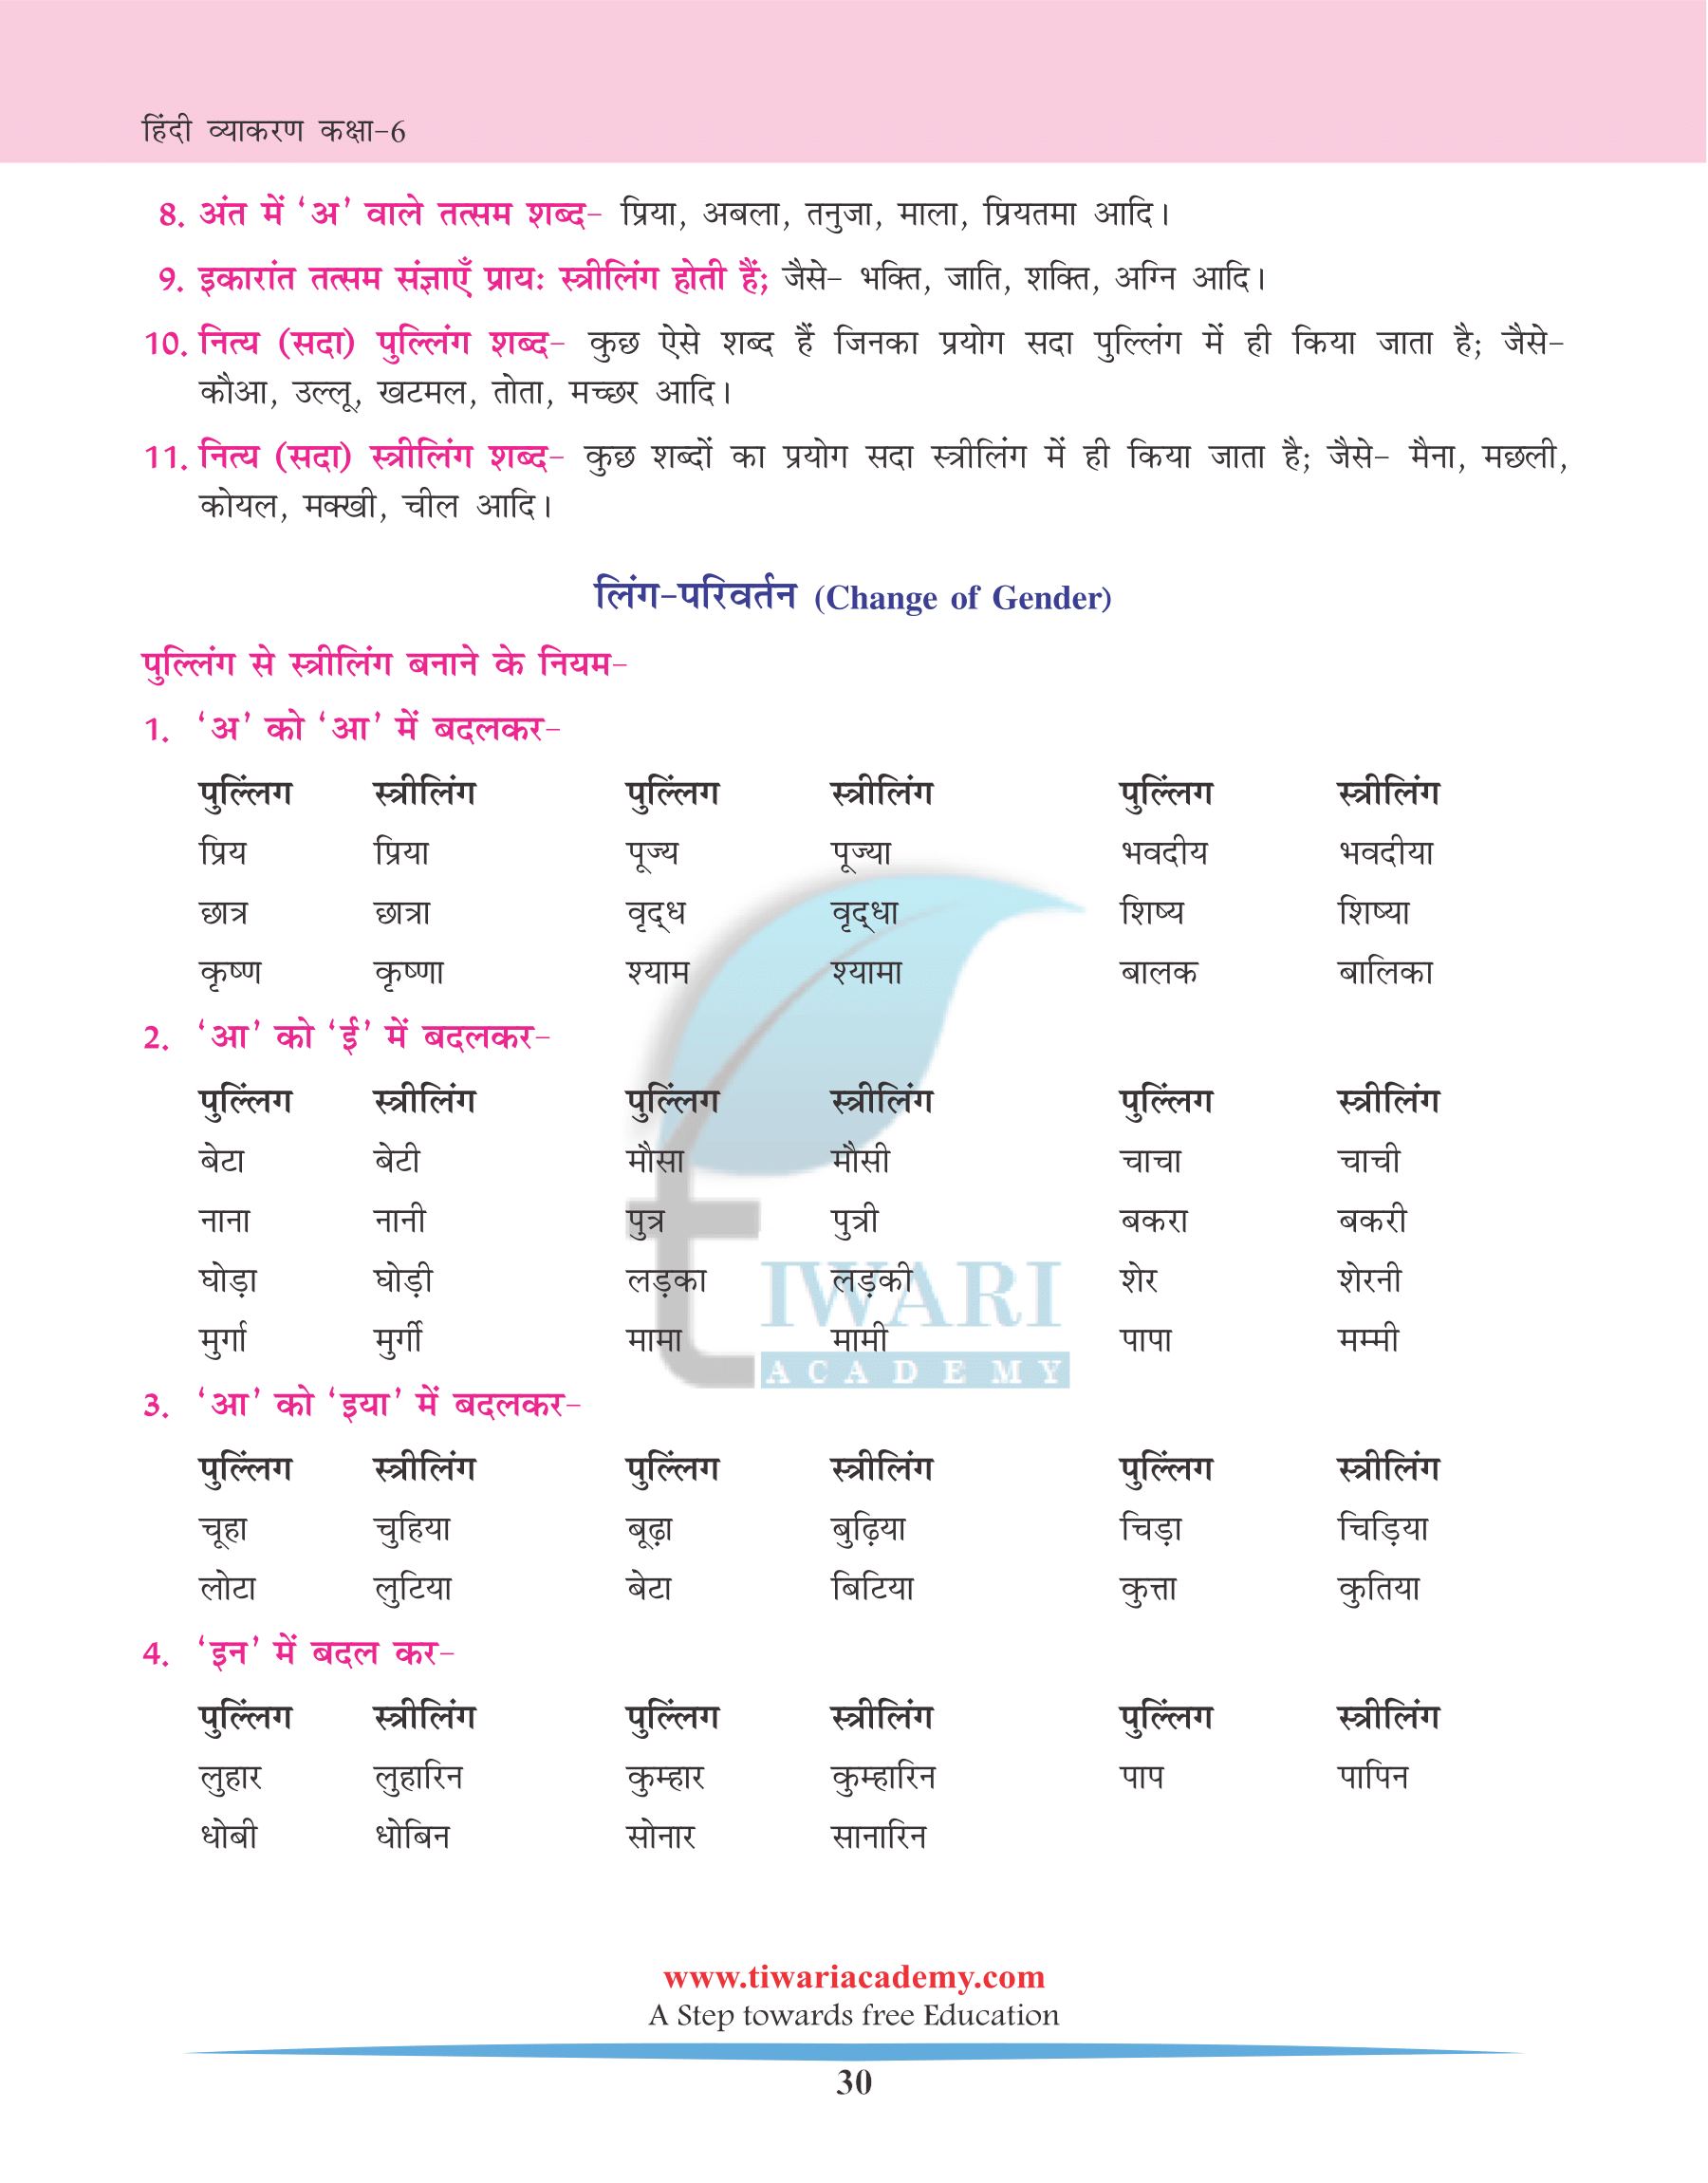 NCERT Solutions for Class 6 Hindi Grammar Chapter 6 लिंग (Ling) तथा उसके भेद